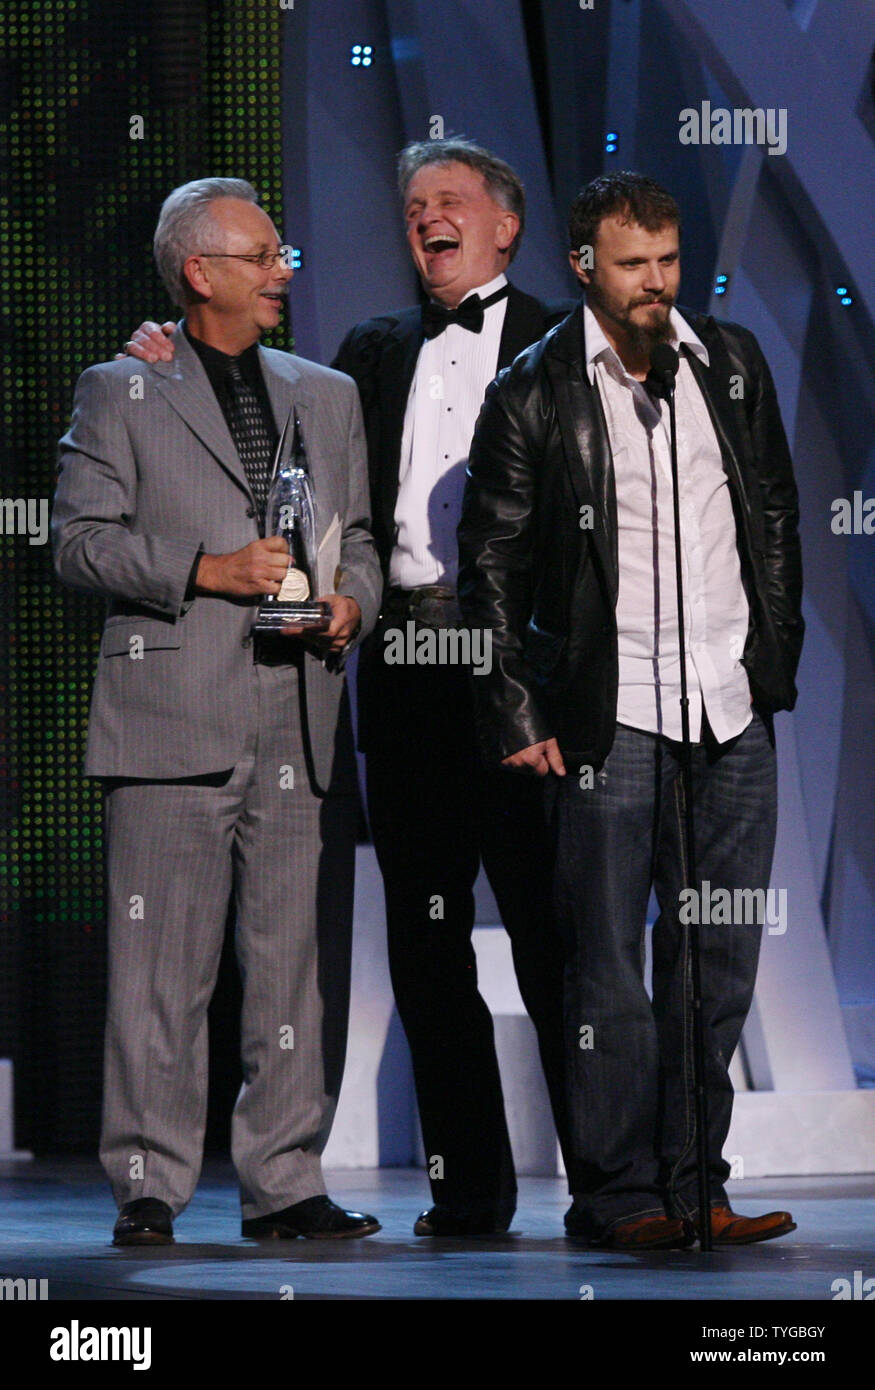 Songwriter Bill Anderson (C), Jamie Johnson and Buddy Cannon (L) accept the Song of the Year award at the 41st annual Country Music Association Awards in Nashville, Tennessee on November 7, 2007. (UPI Photo/Frederick Breedon) Stock Photo